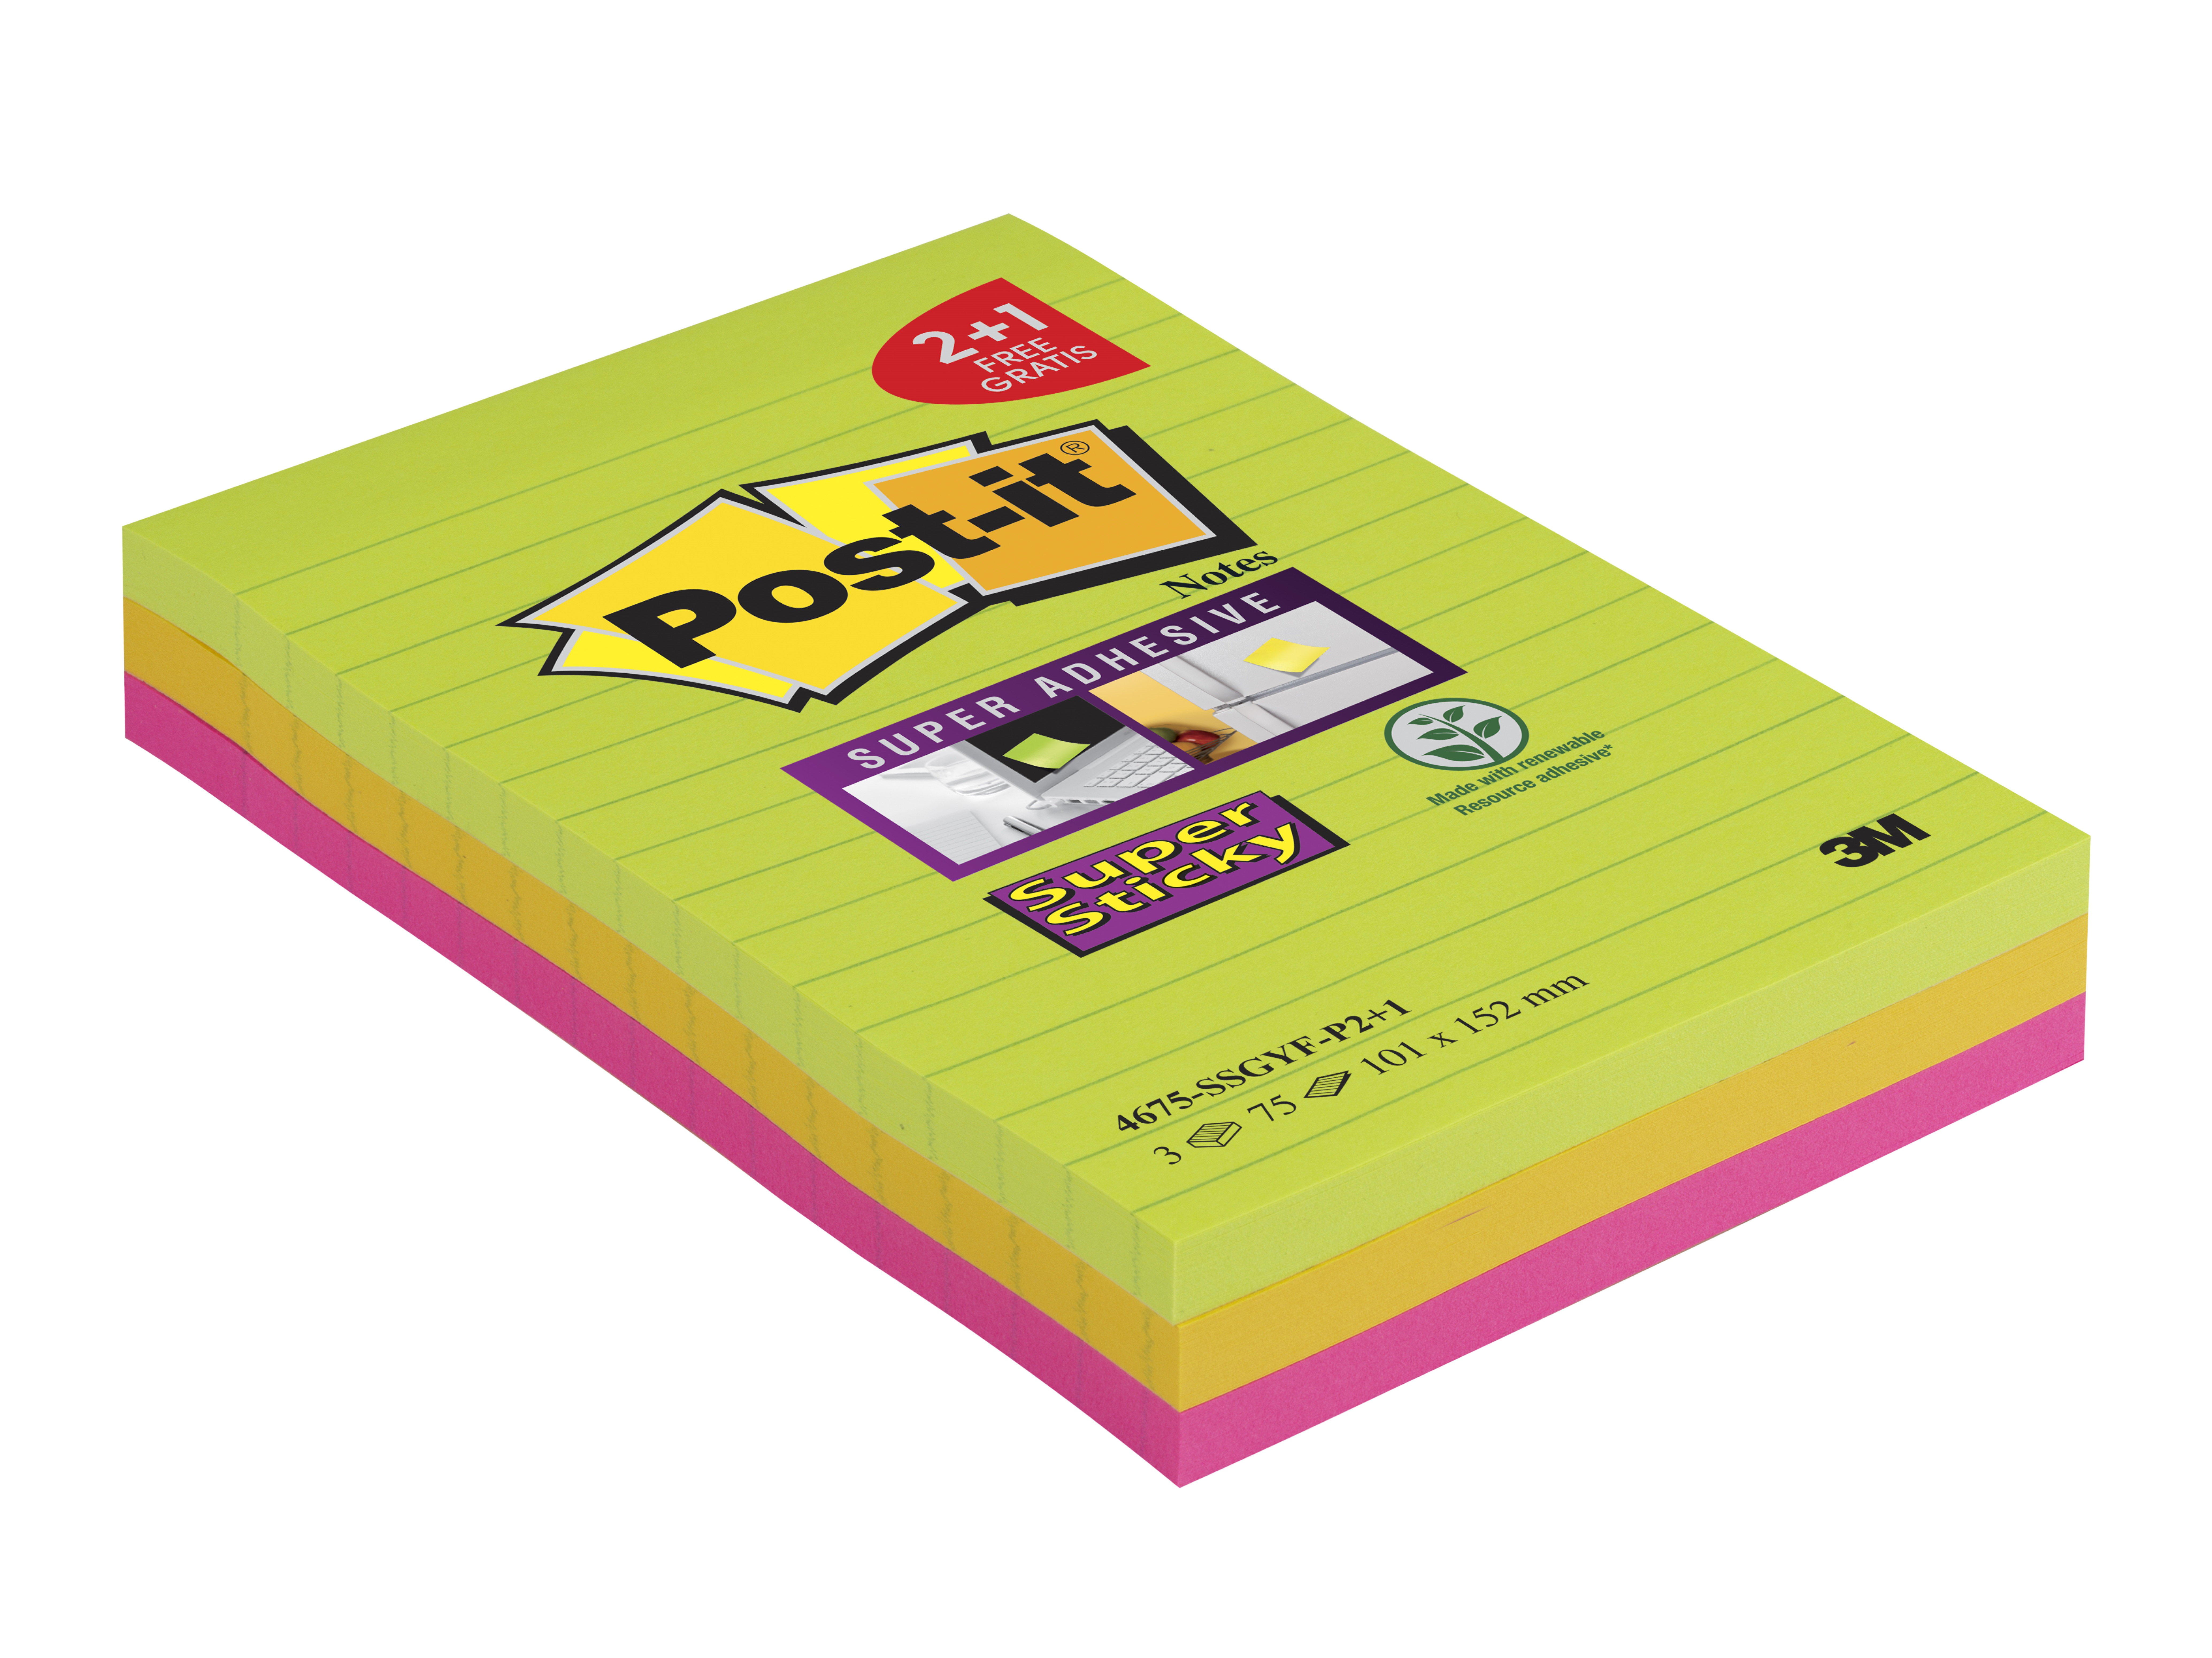 Post-it - 3 Blocs notes Super Sticky - grand format 101 x 152 mm Pas Cher